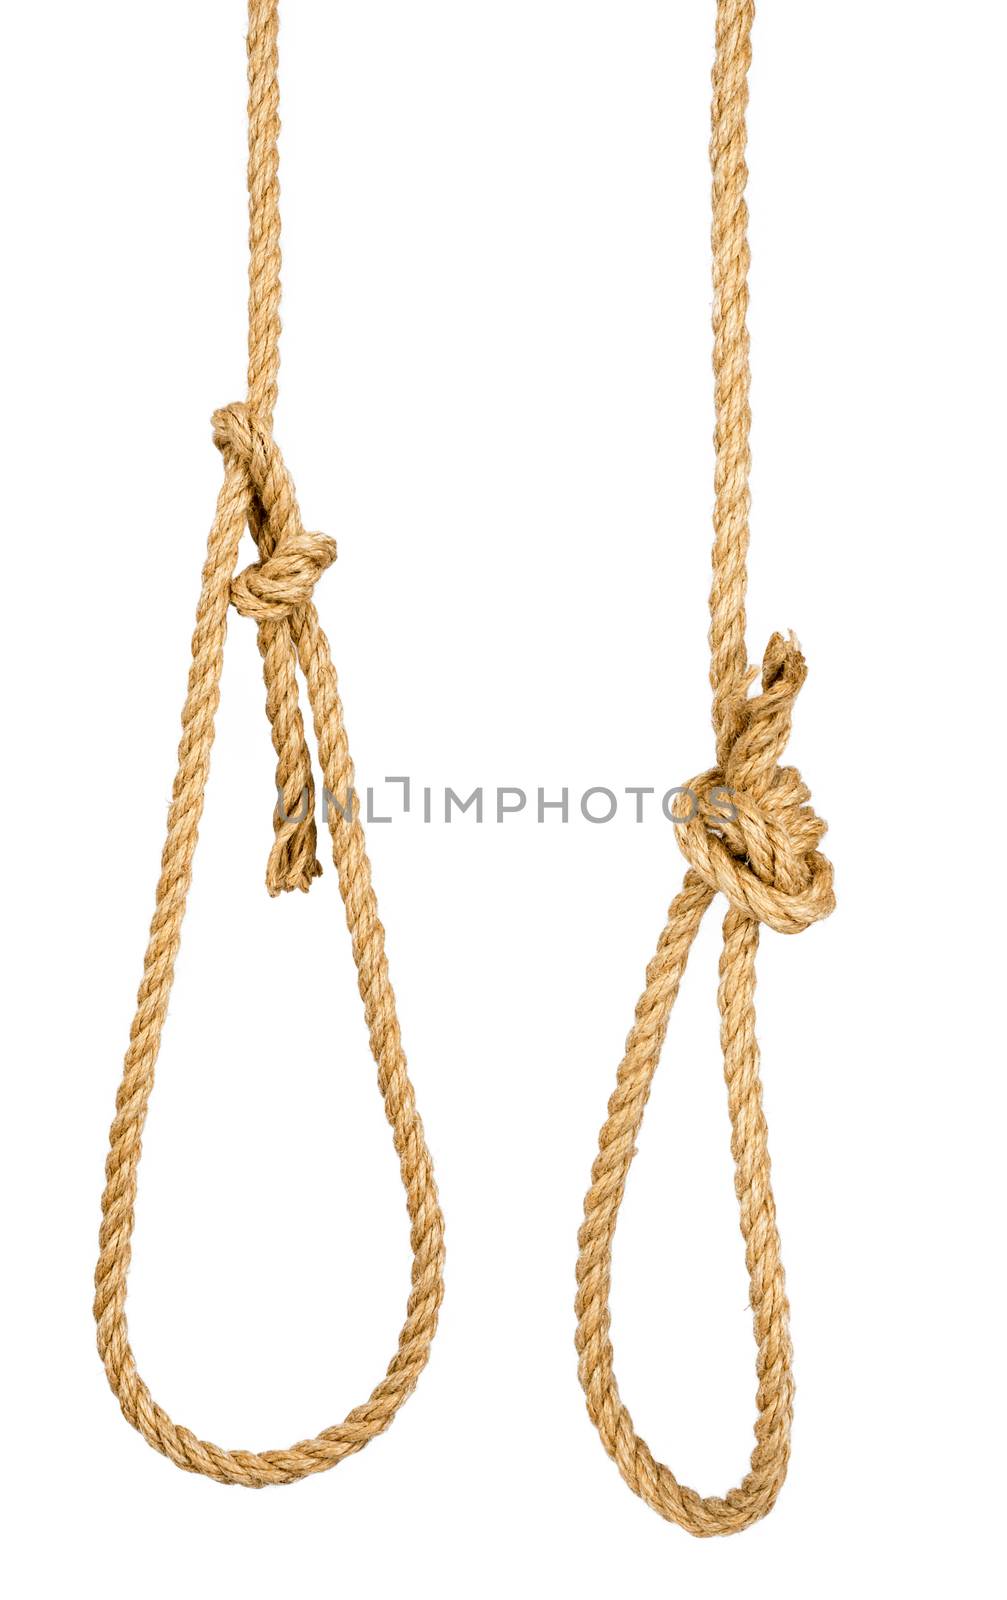 Rope loop isolated on white background, closeup